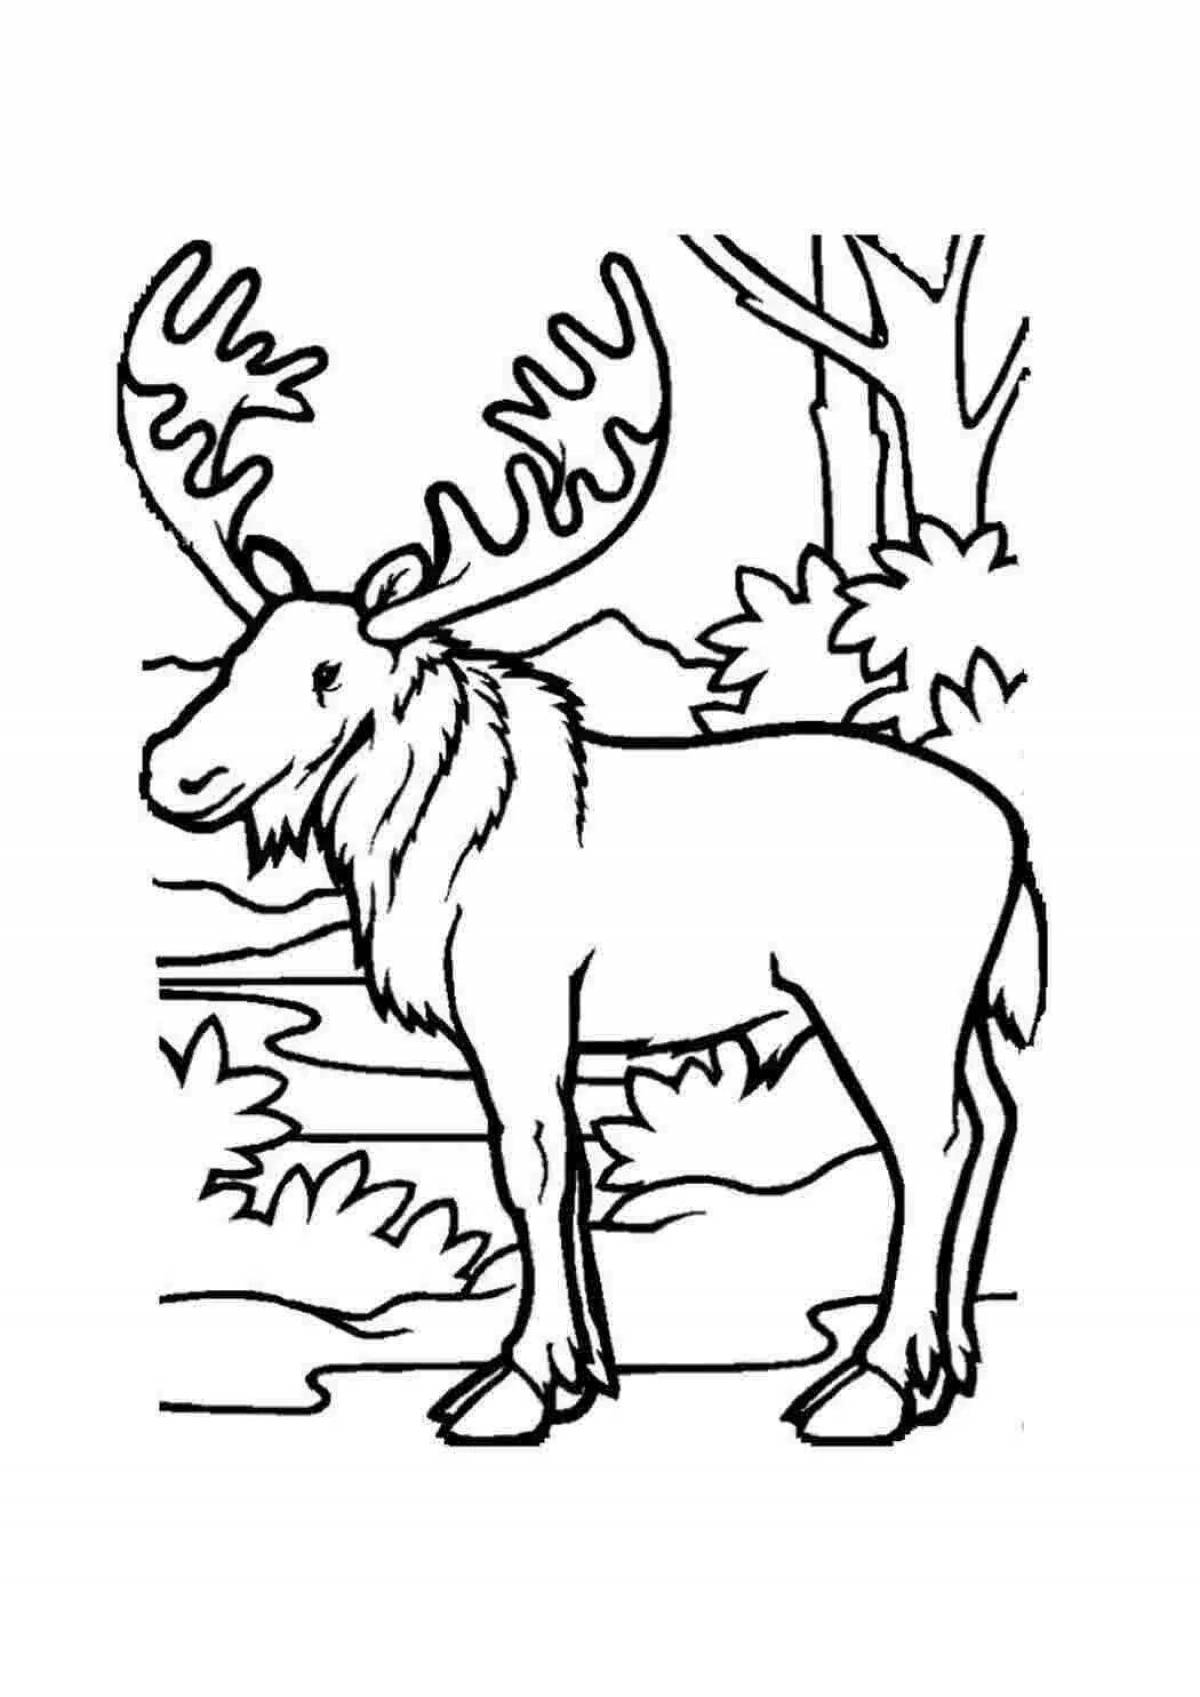 Fun coloring of forest animals for preschoolers